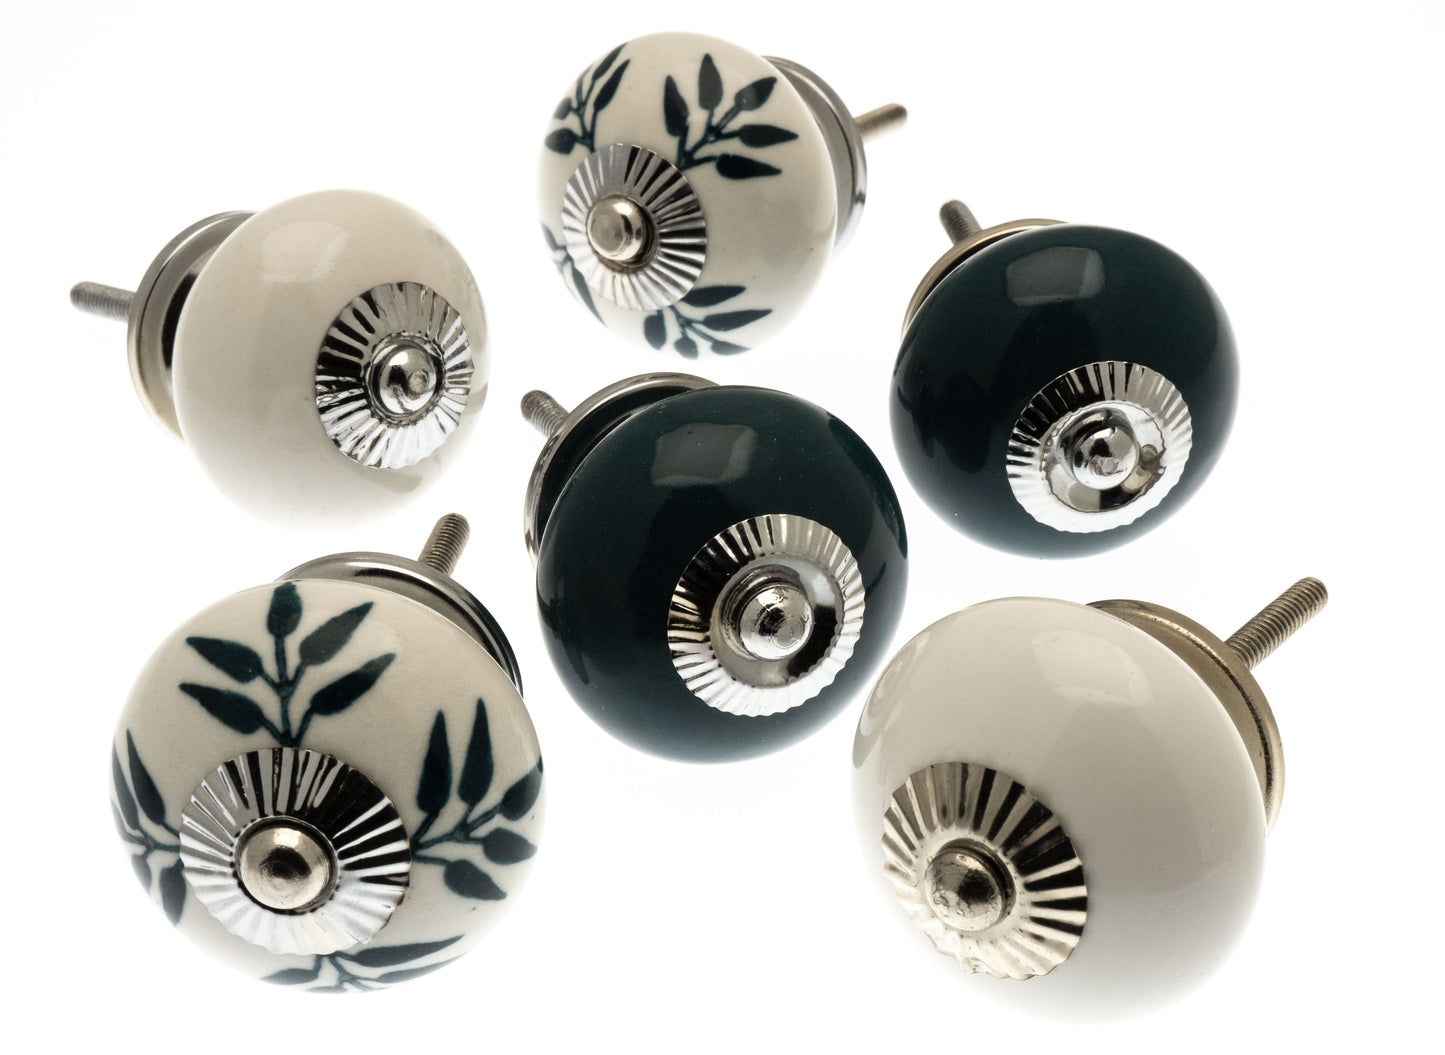 Ceramic Door Knobs in Green and White - Set of 6